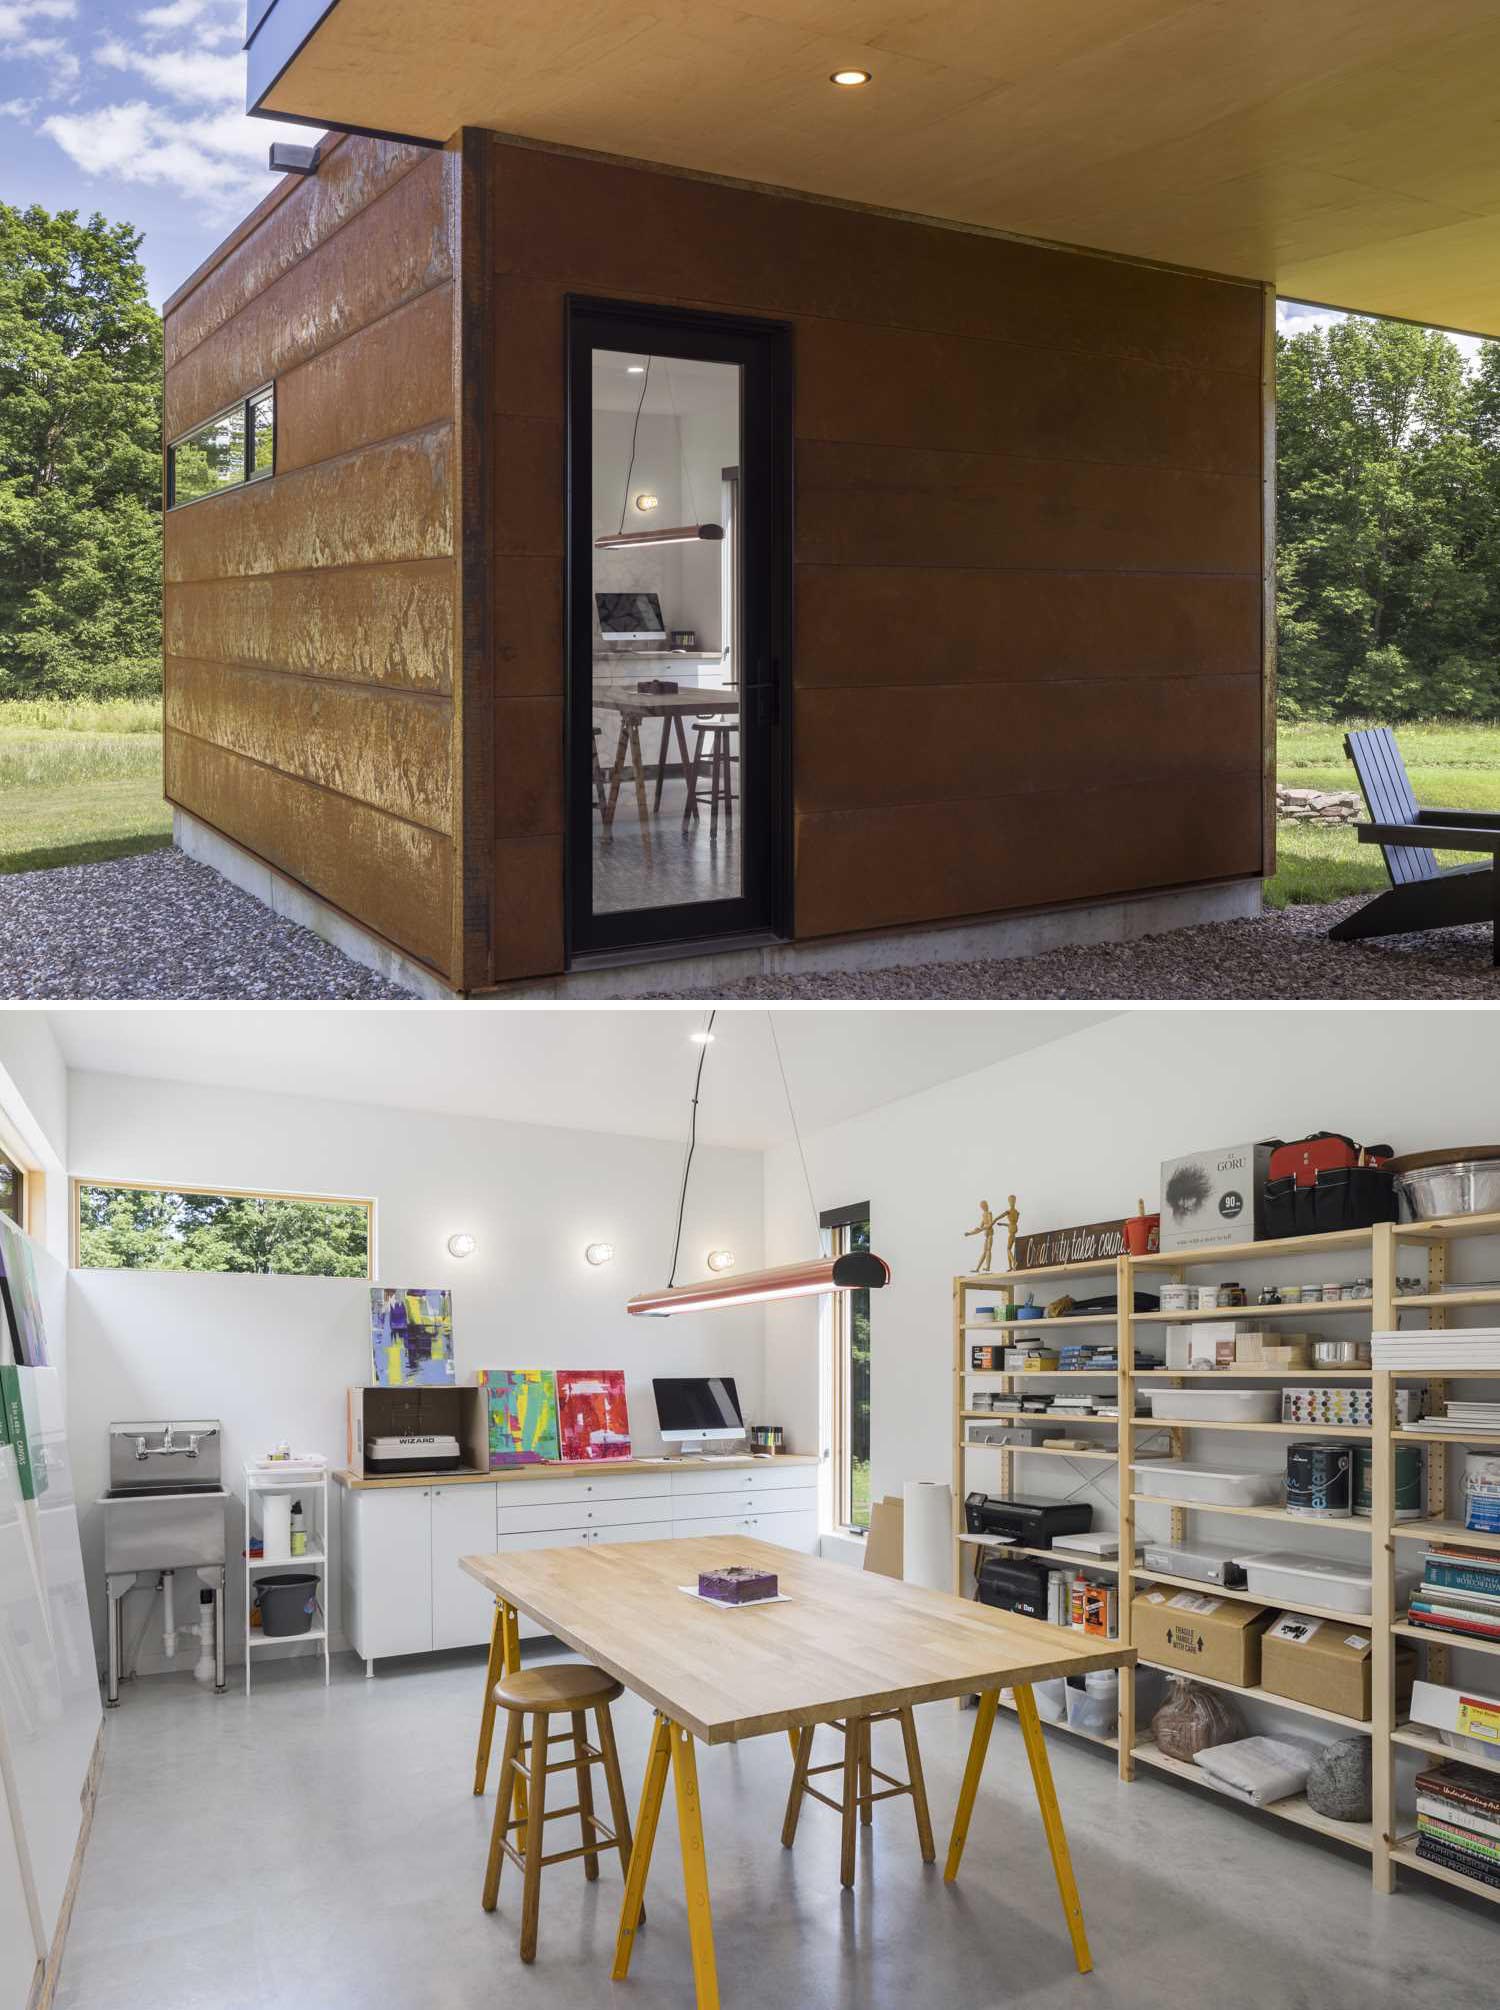 This modern studio, covered in weathering steel, is designed to be a flexible creative space, allowing the home owners to focus on a wide variety of creative interests, be it photography, painting, yarn dyeing, knitting, or soap making.